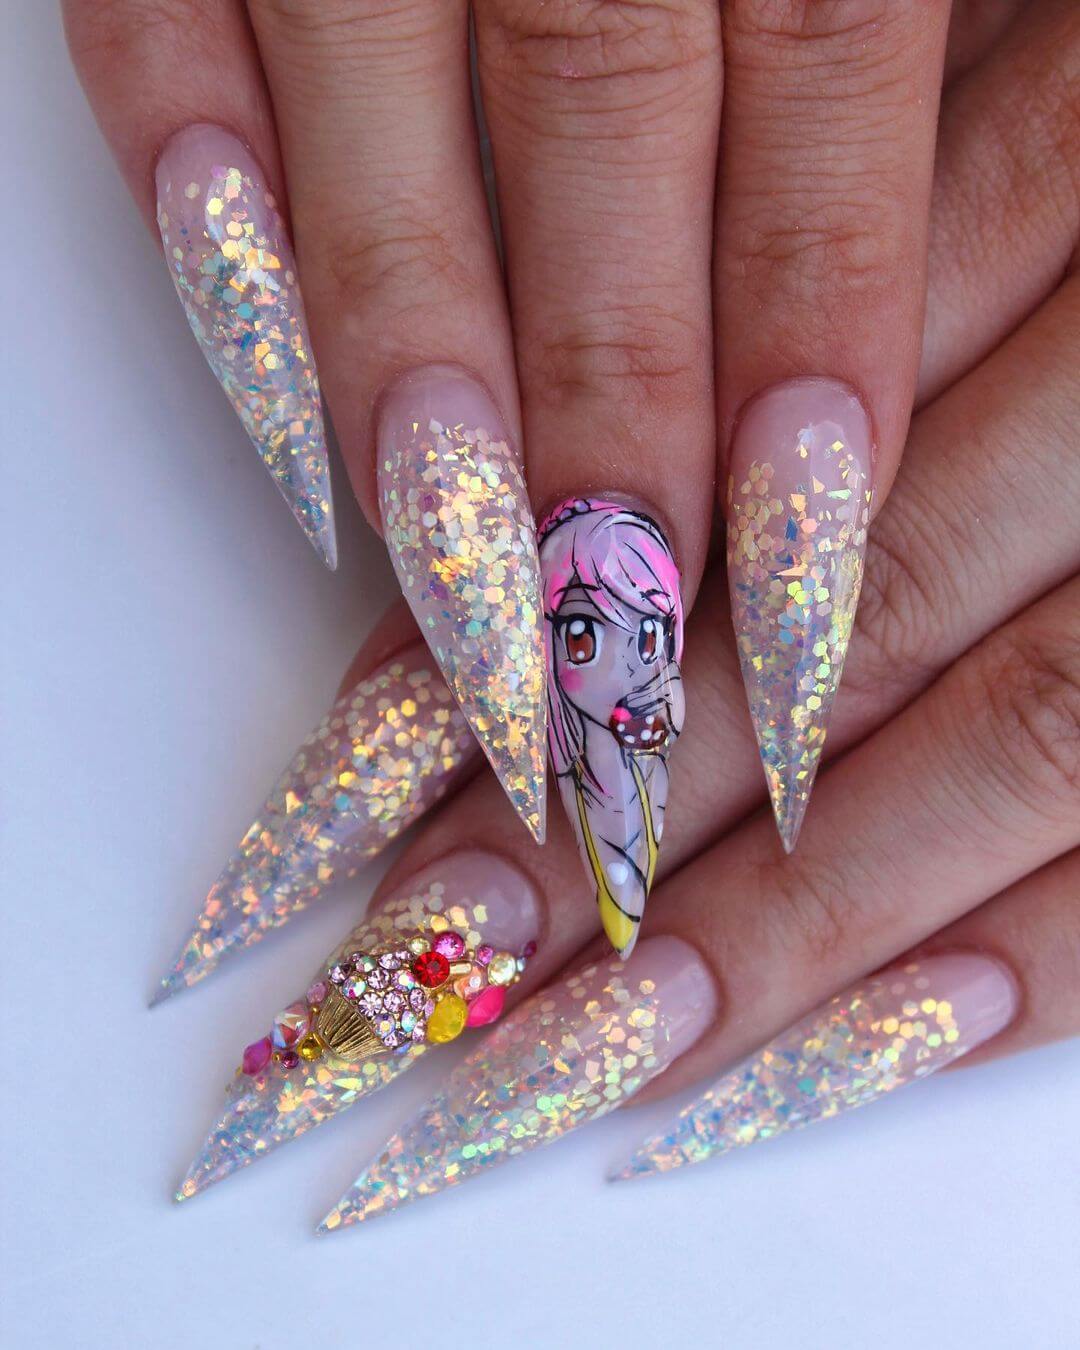 Girl eating cupcakes with sequinned nail art